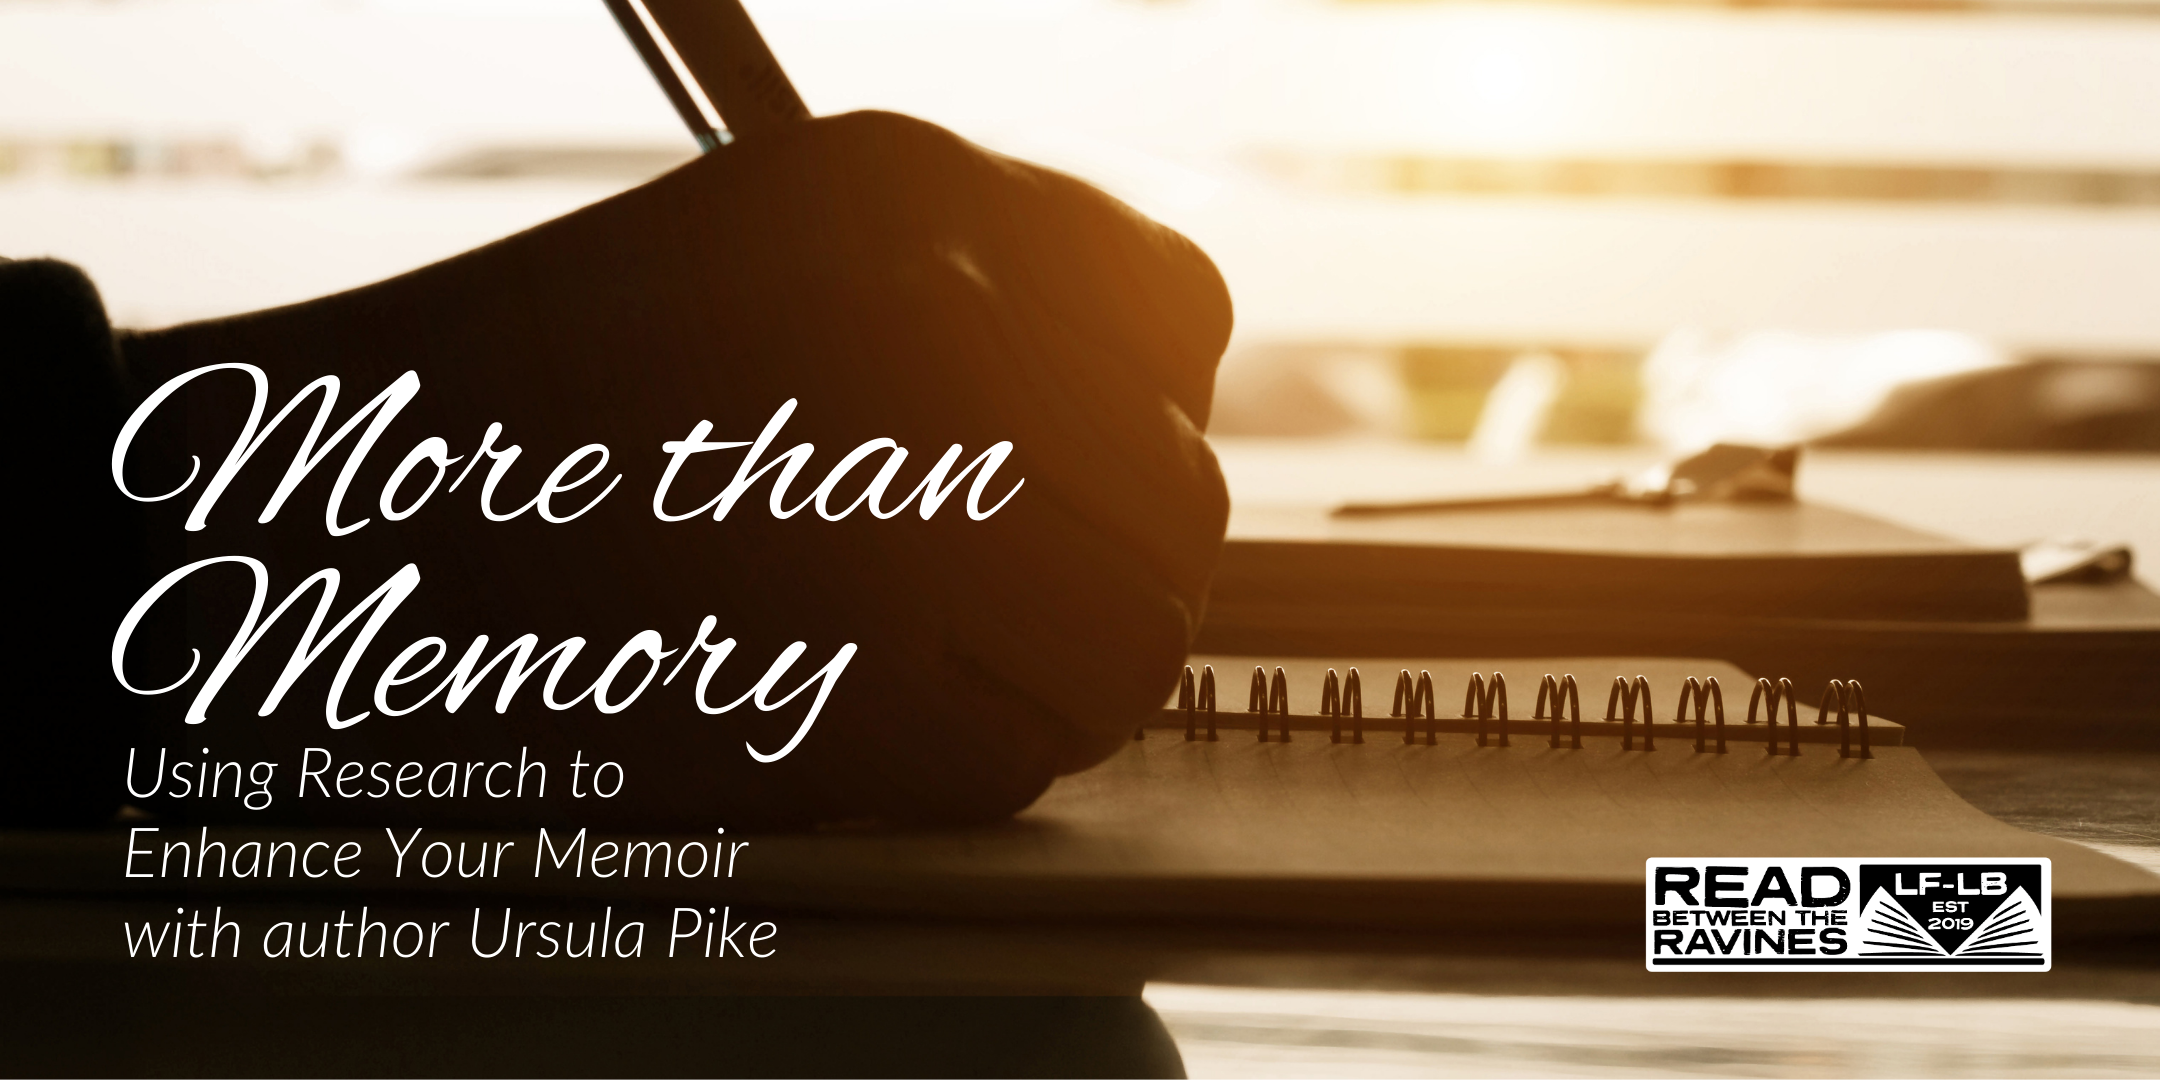 image of "More than Memory: Using Research to Enhance Your Memoir with author Ursula Pike"